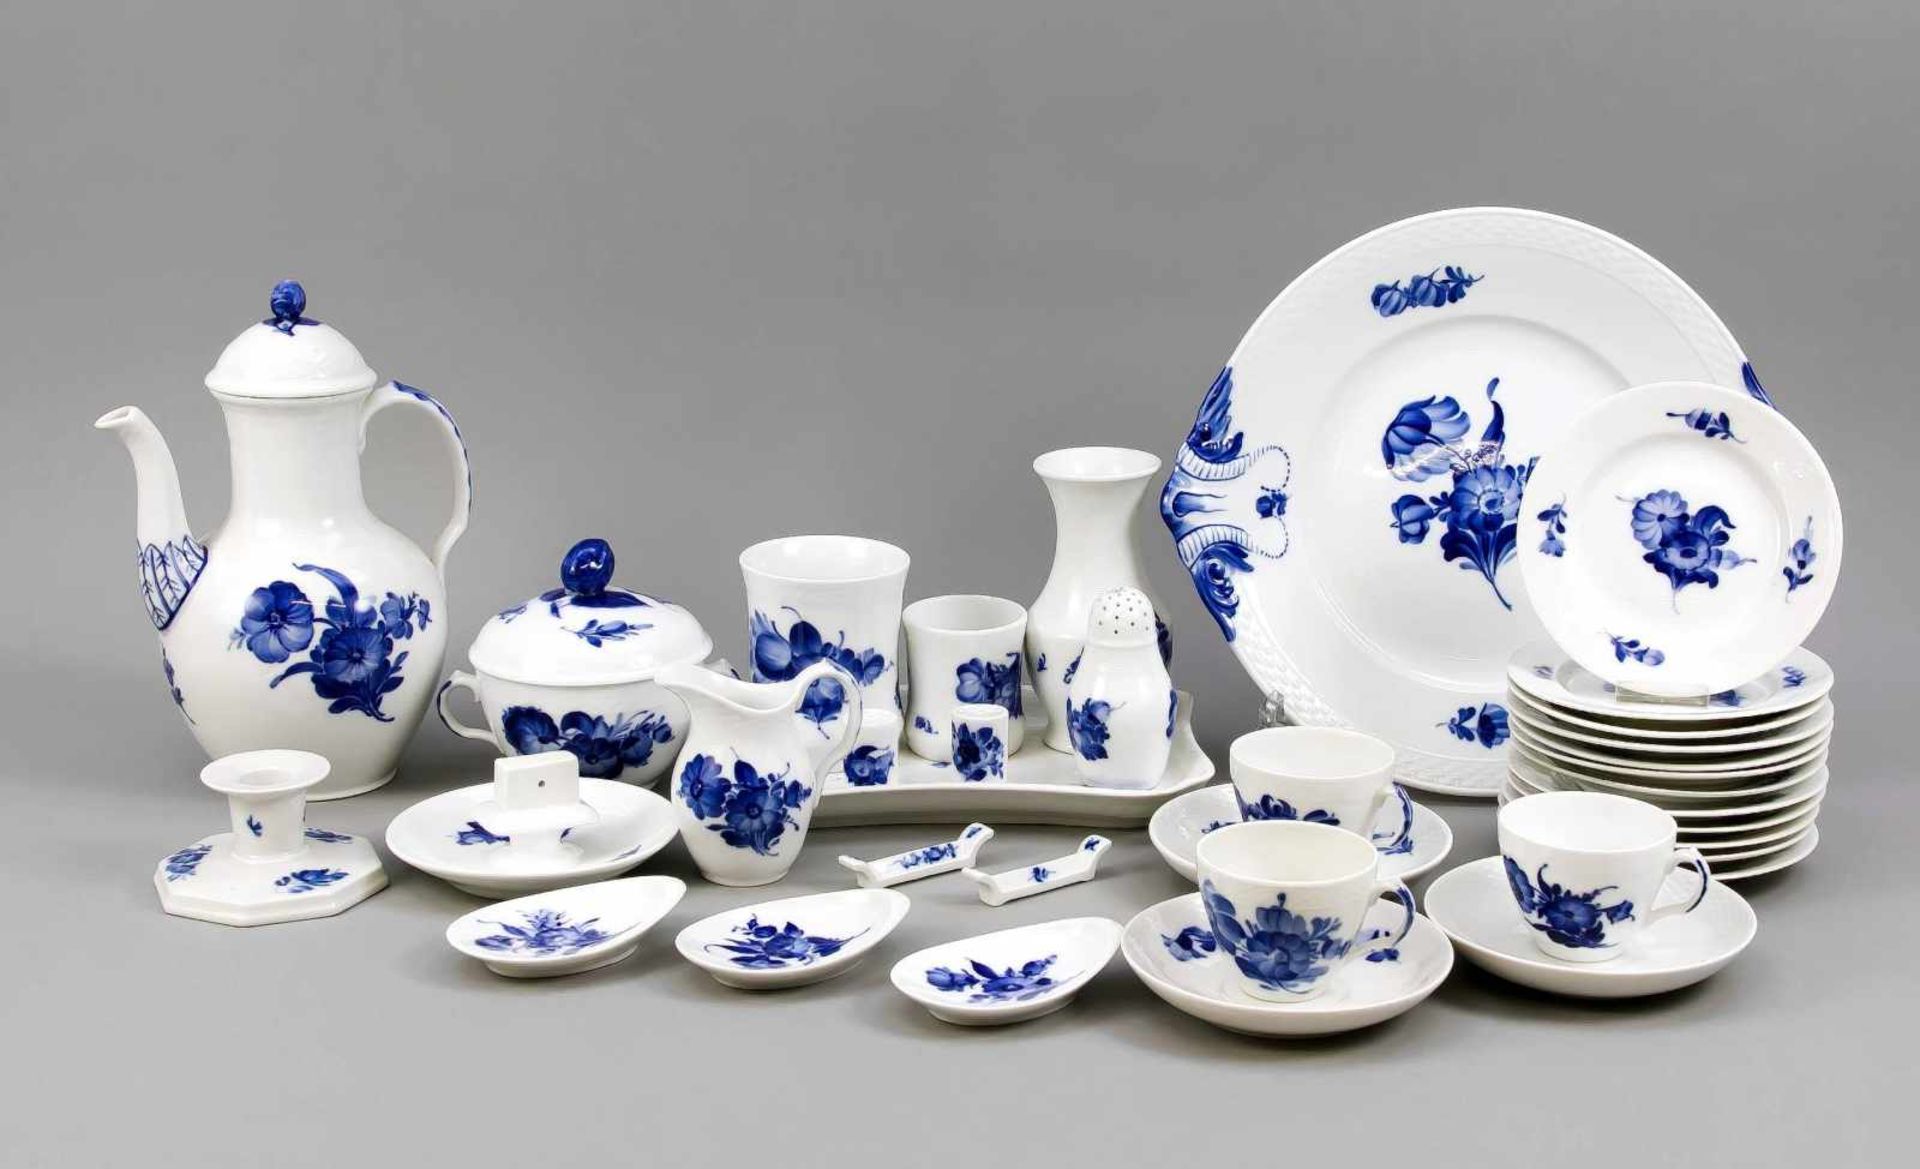 Coffee service for 12 people, 60 pieces, Royal Copenhagen, mid-20th century, form Ozier,